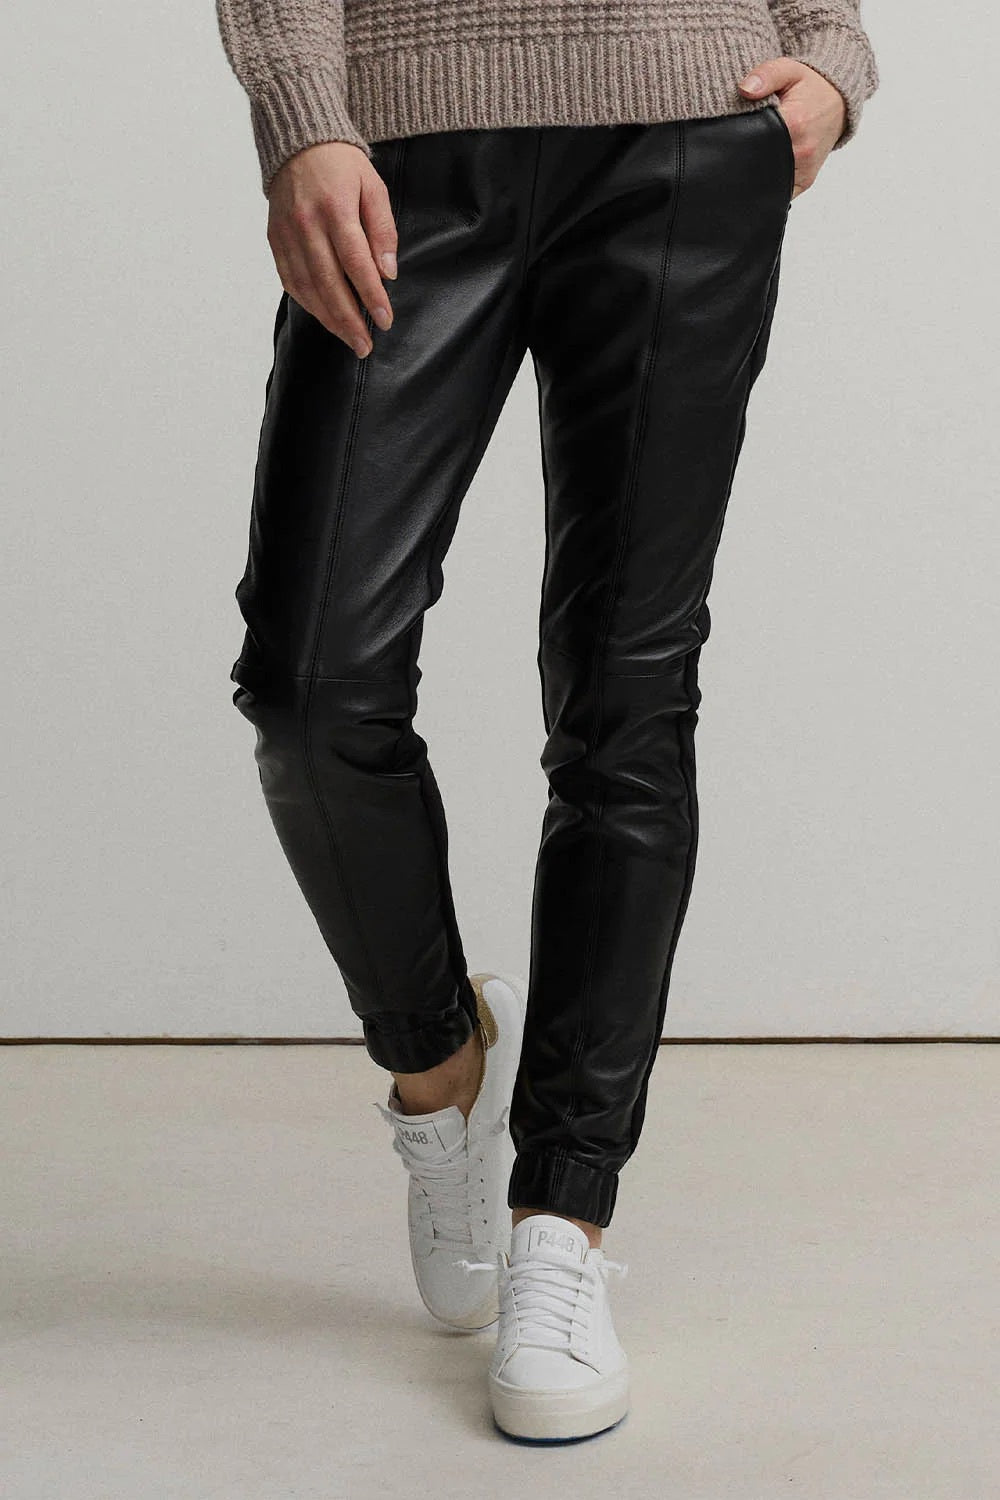 Raw by Raw Fergie Jogger Pant